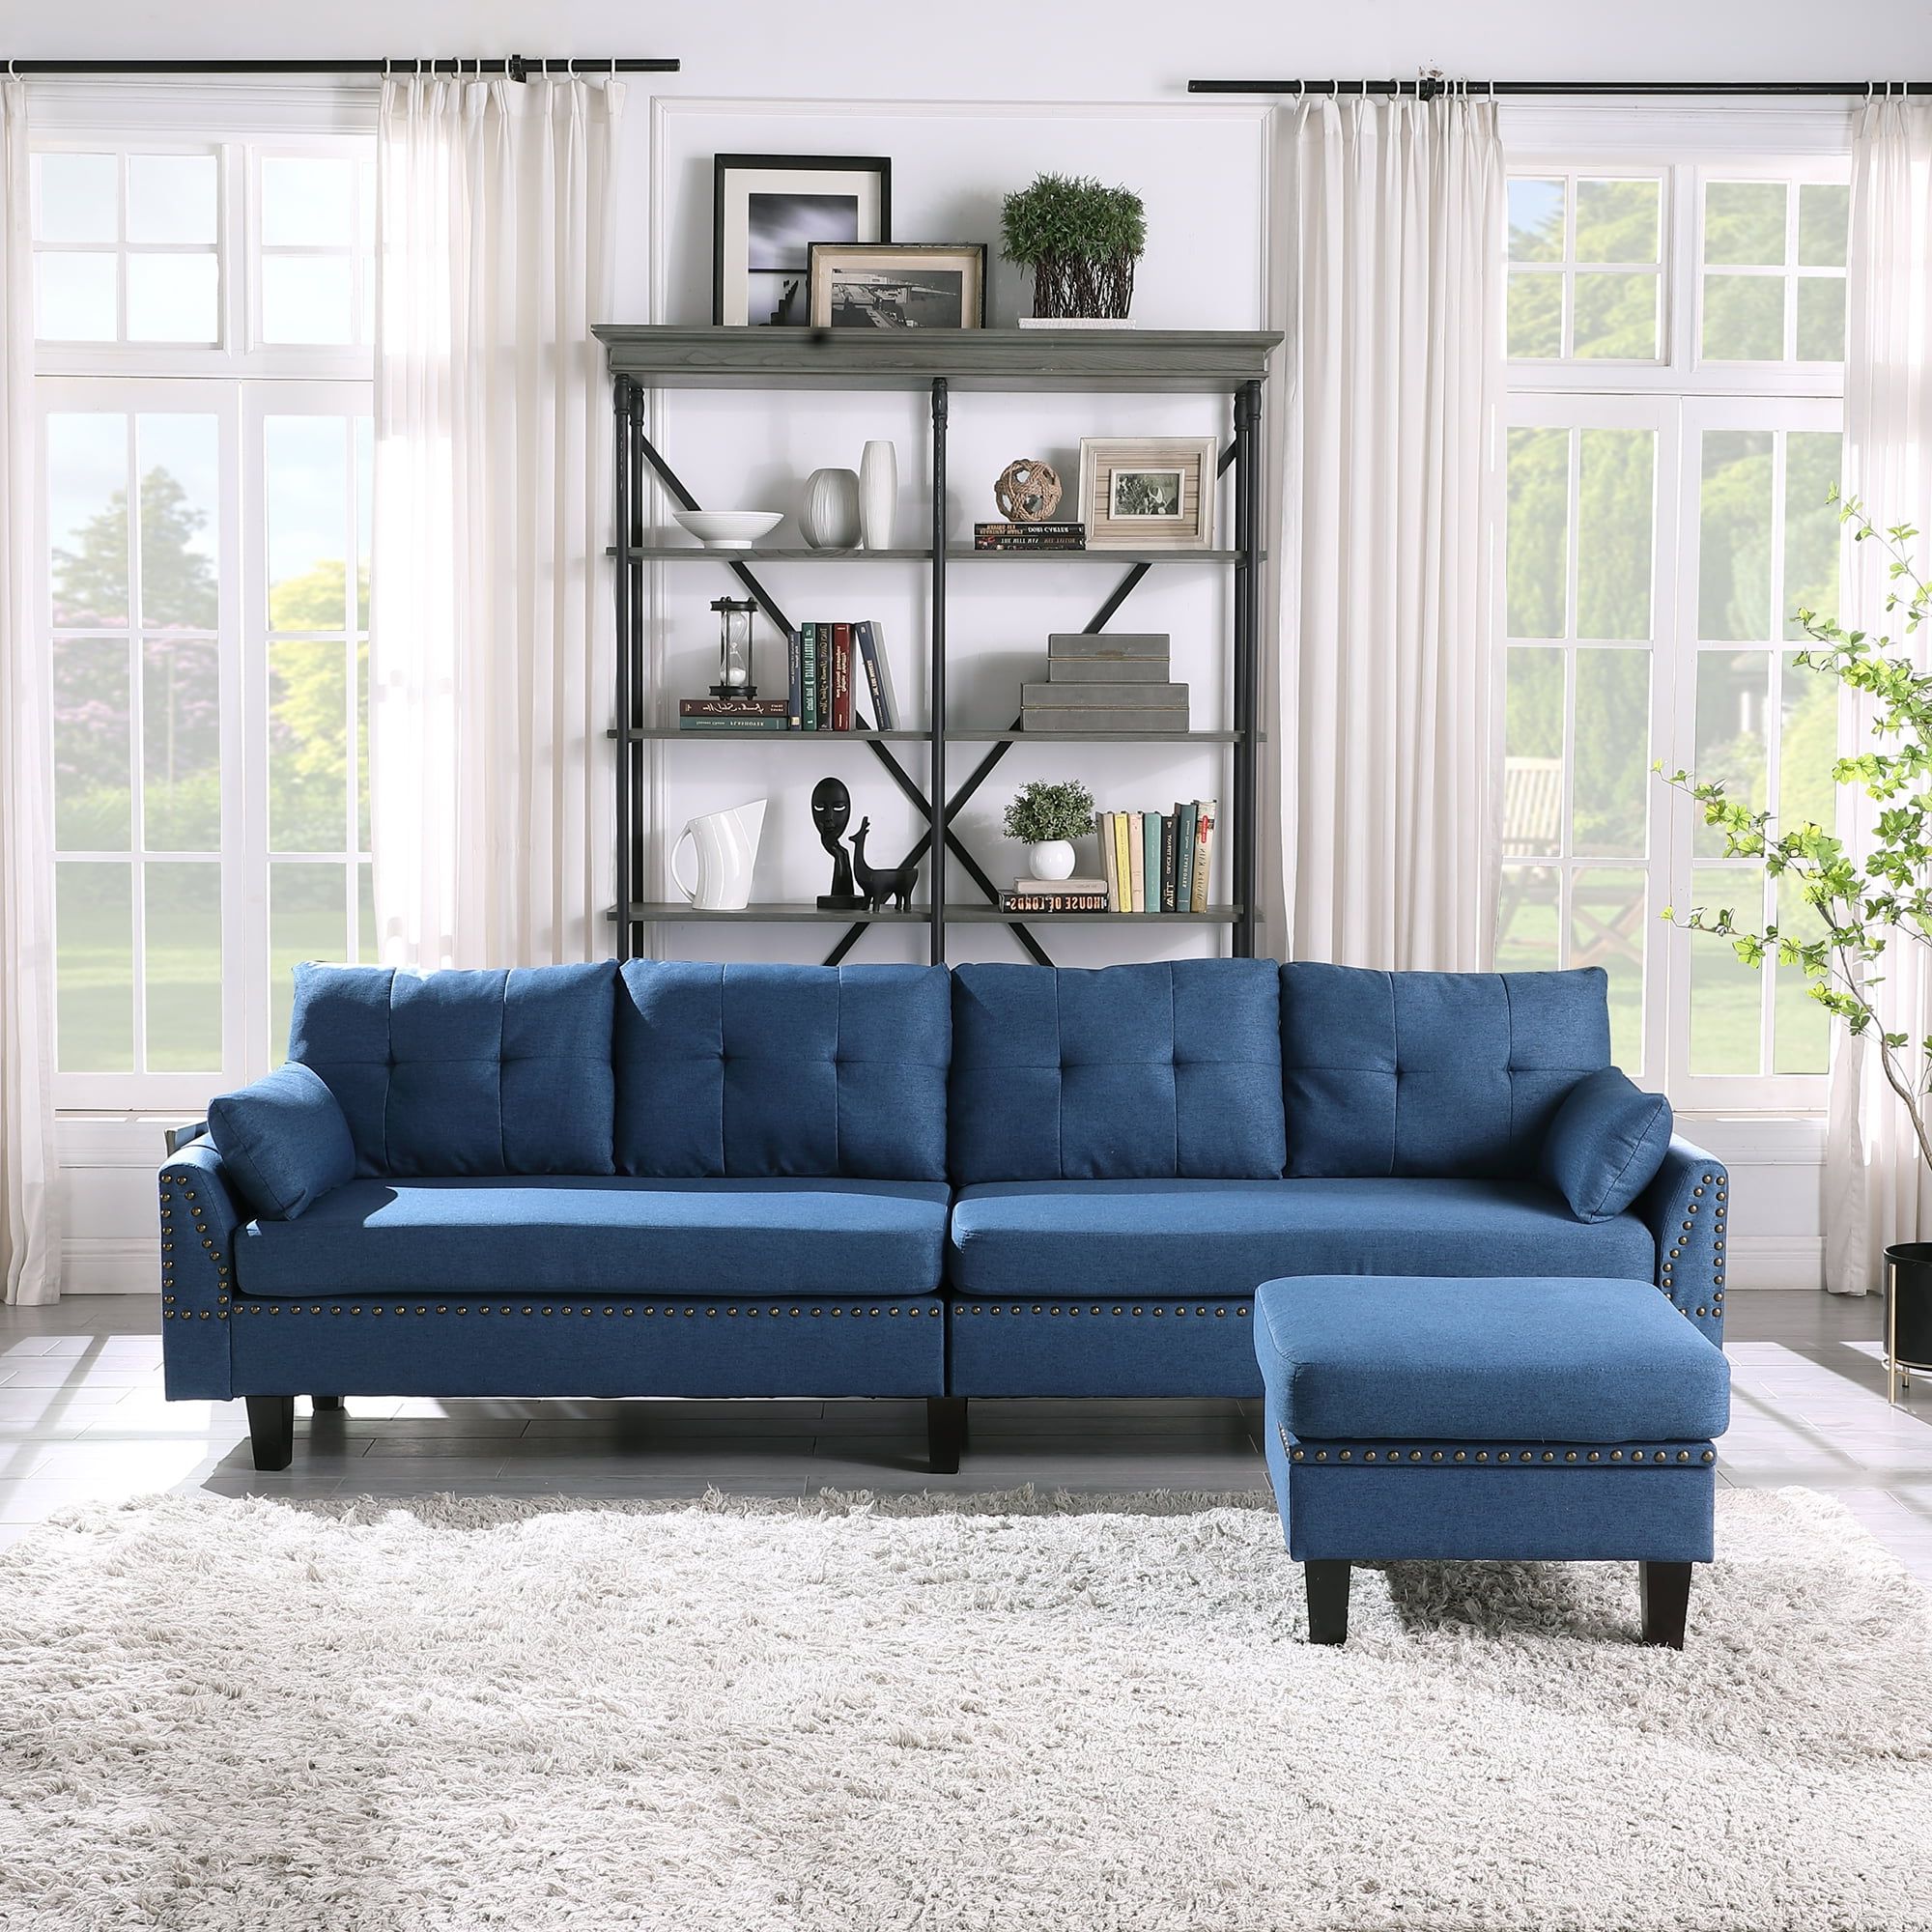 Urhomepro Mid Century Couches And Sofas With Ottoman, 2 Pillows, Modern With Sofas With Ottomans (Gallery 13 of 20)